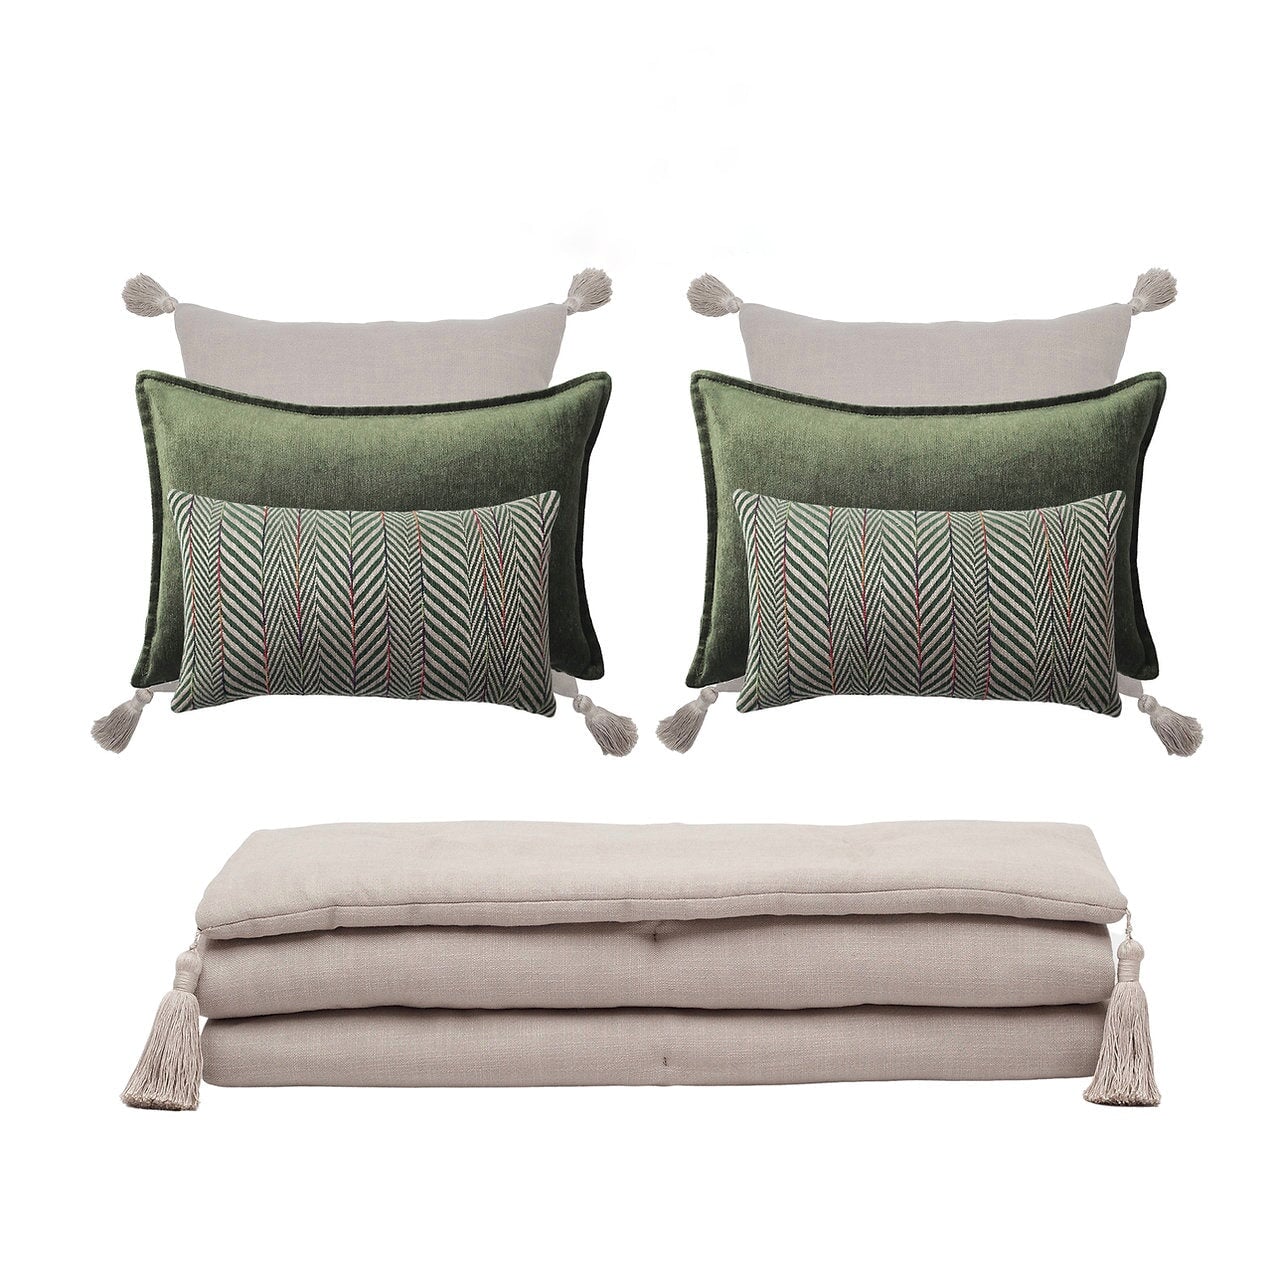 Bed Runner and 6 Pieces Green and Beige Pillow Set